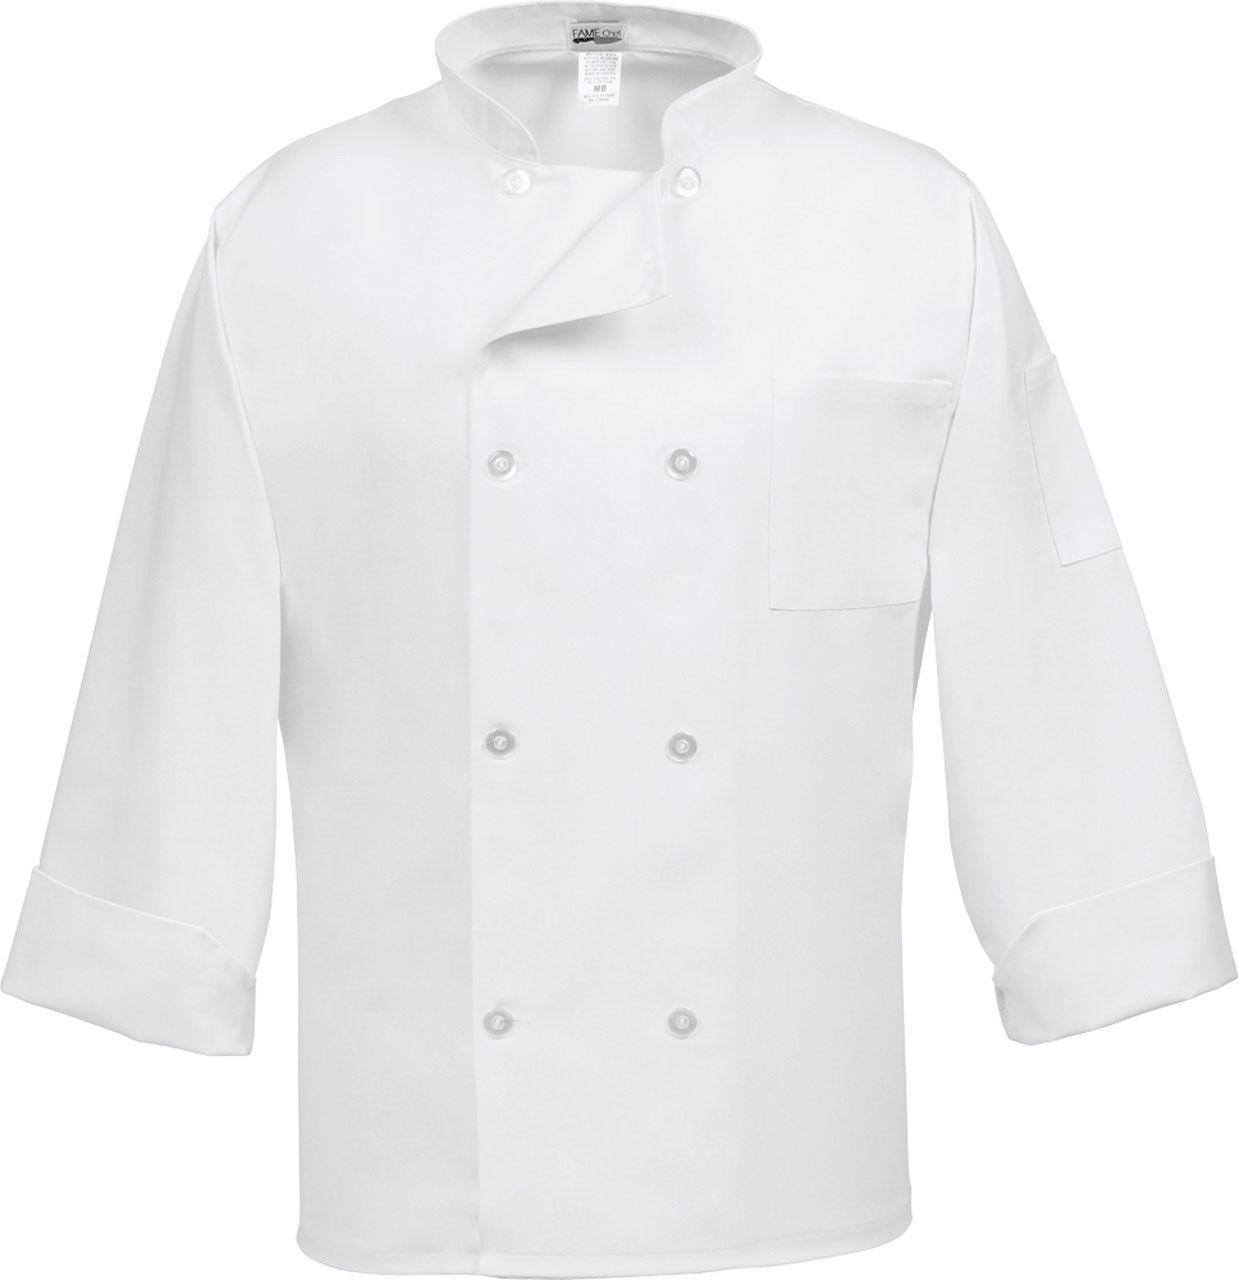 Does the button coat for chefs have any special finish?